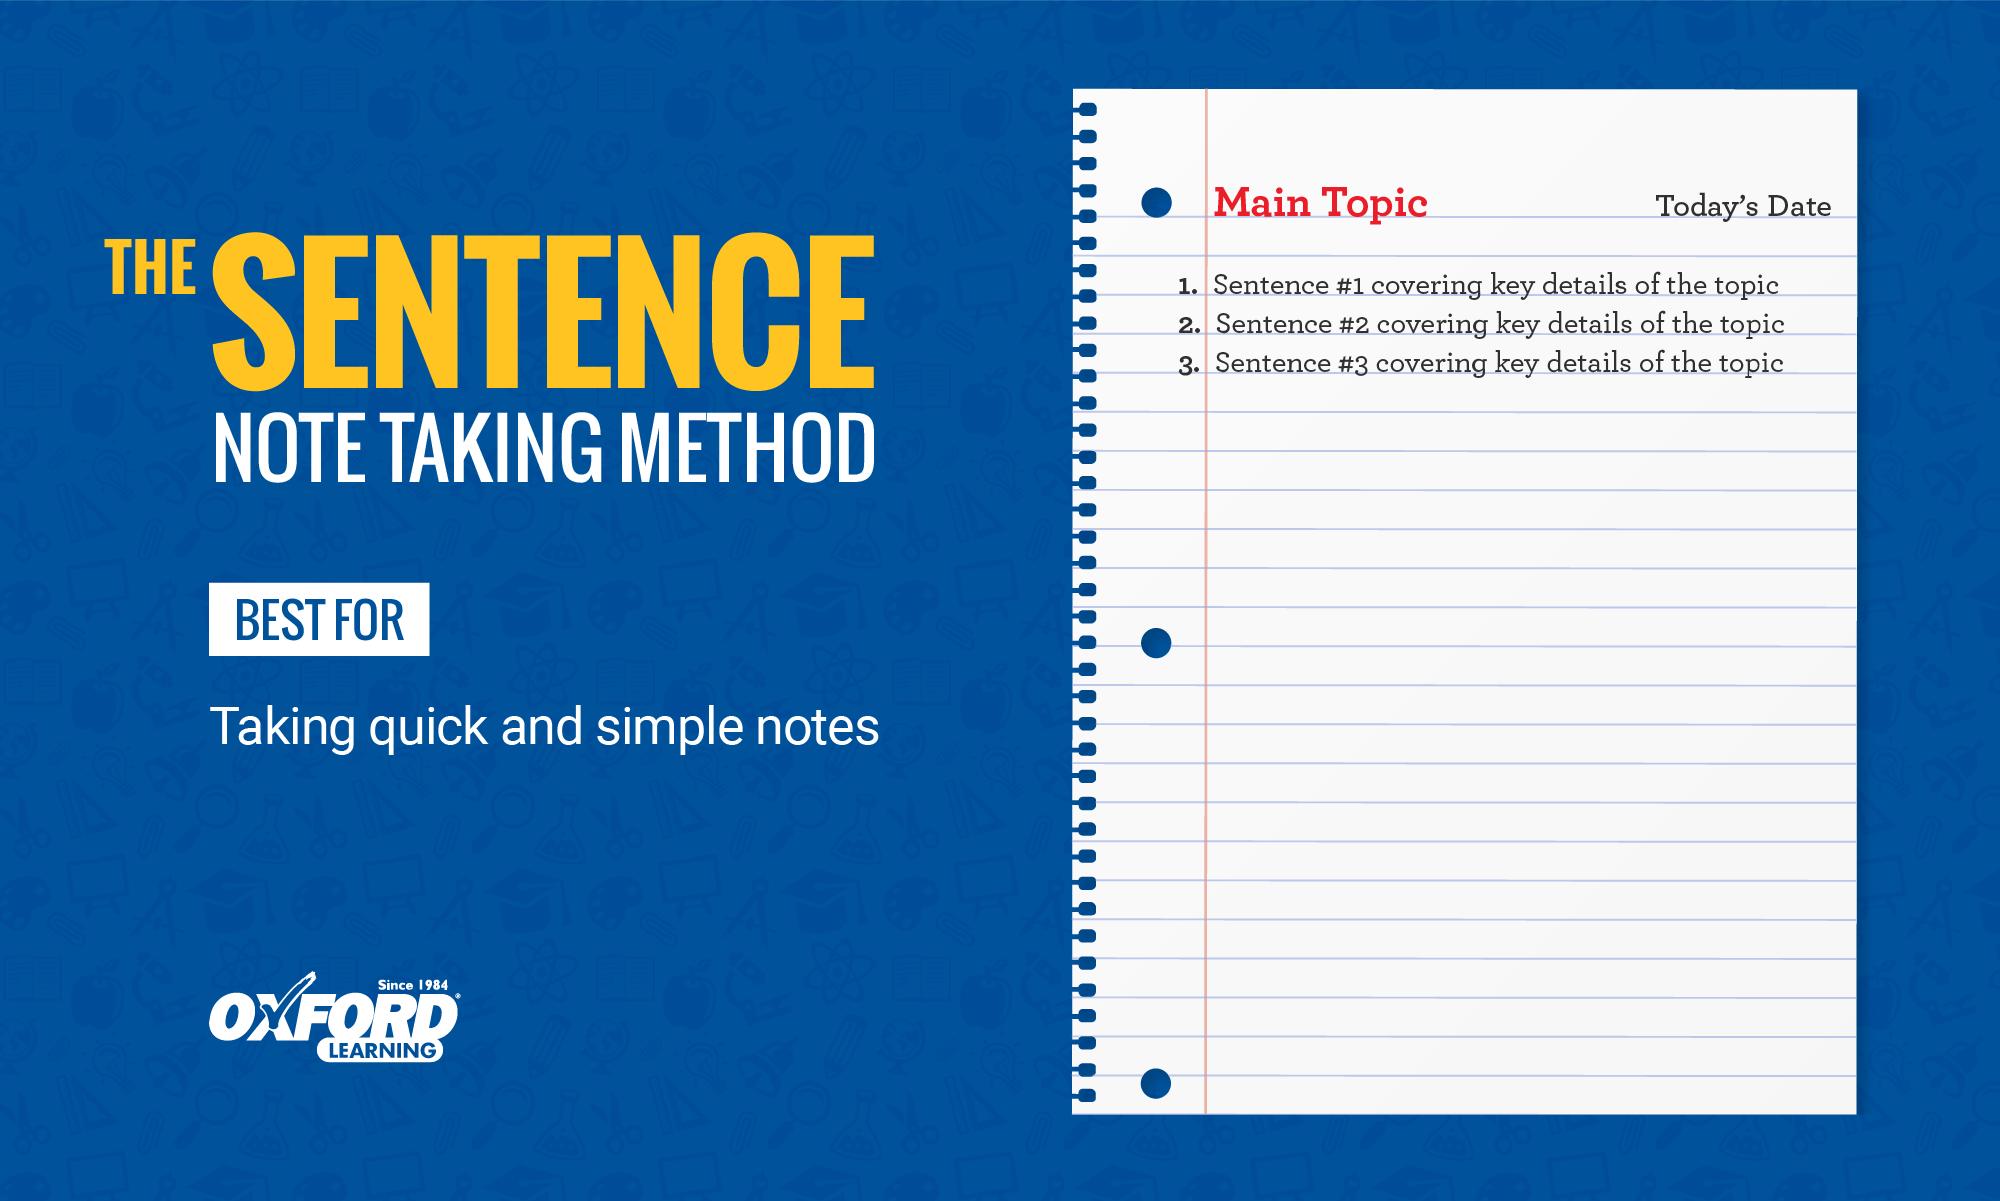 Example page set up for the Sentence note taking method